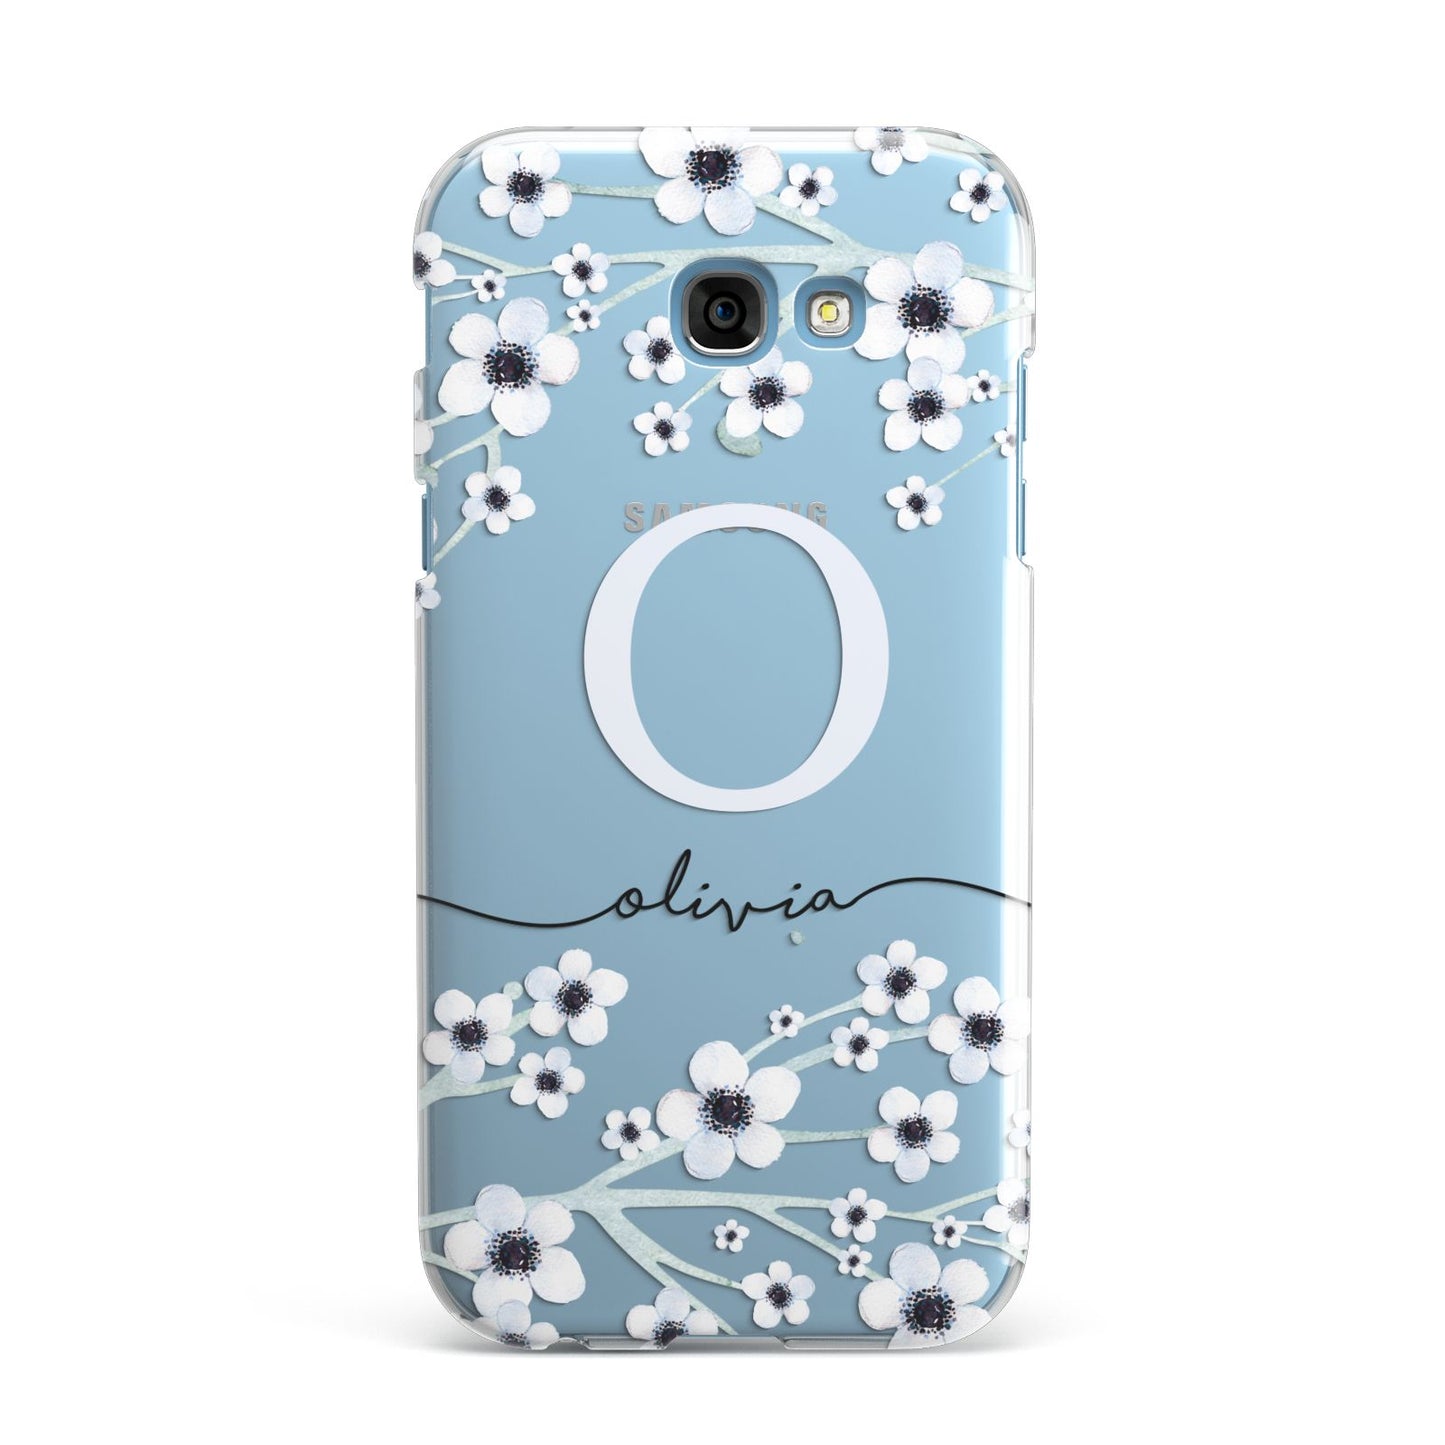 Personalised White Flower Samsung Galaxy A7 2017 Case